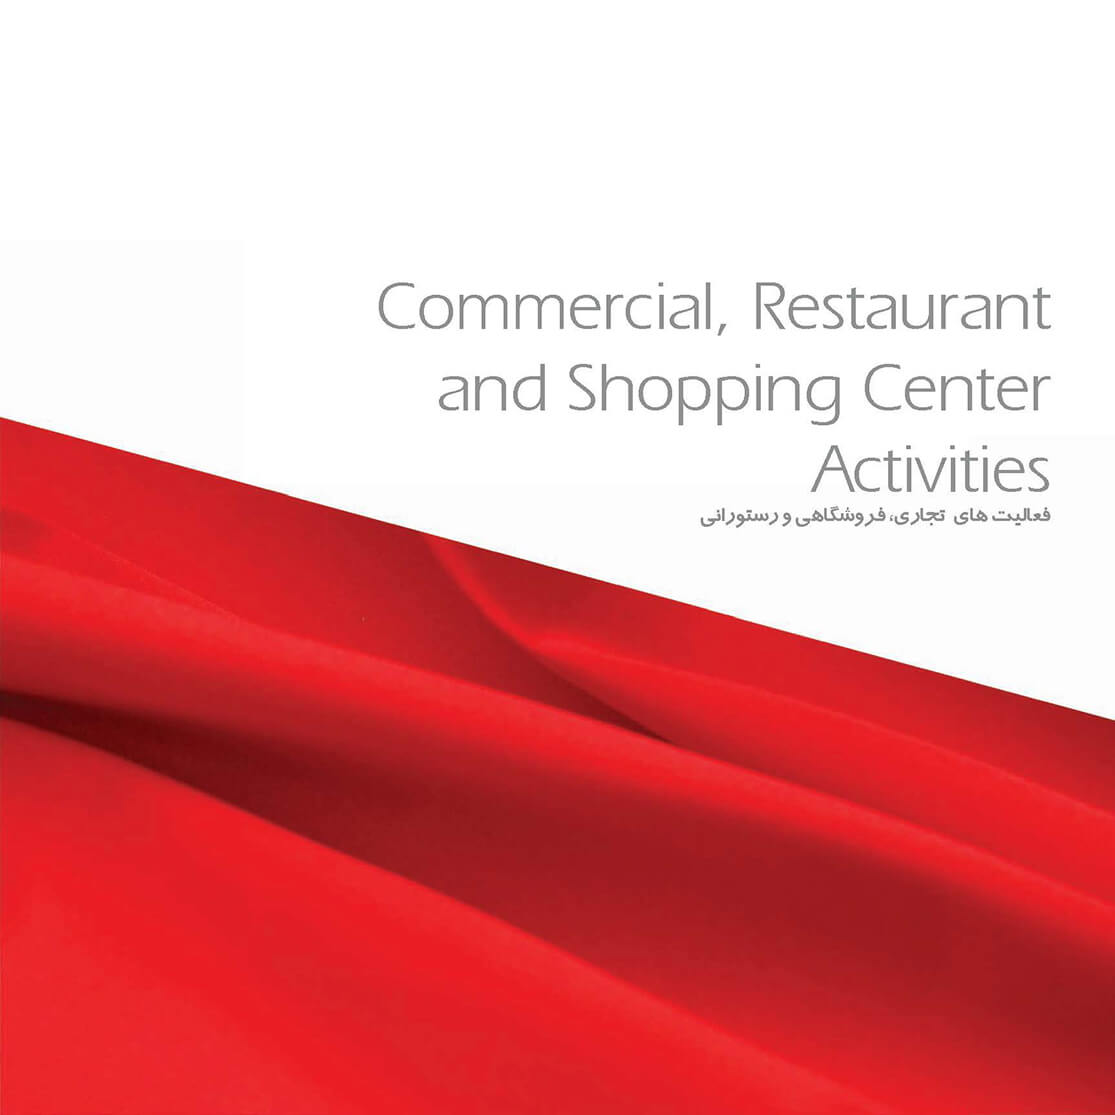 commercial,restaurant and shopping center activities